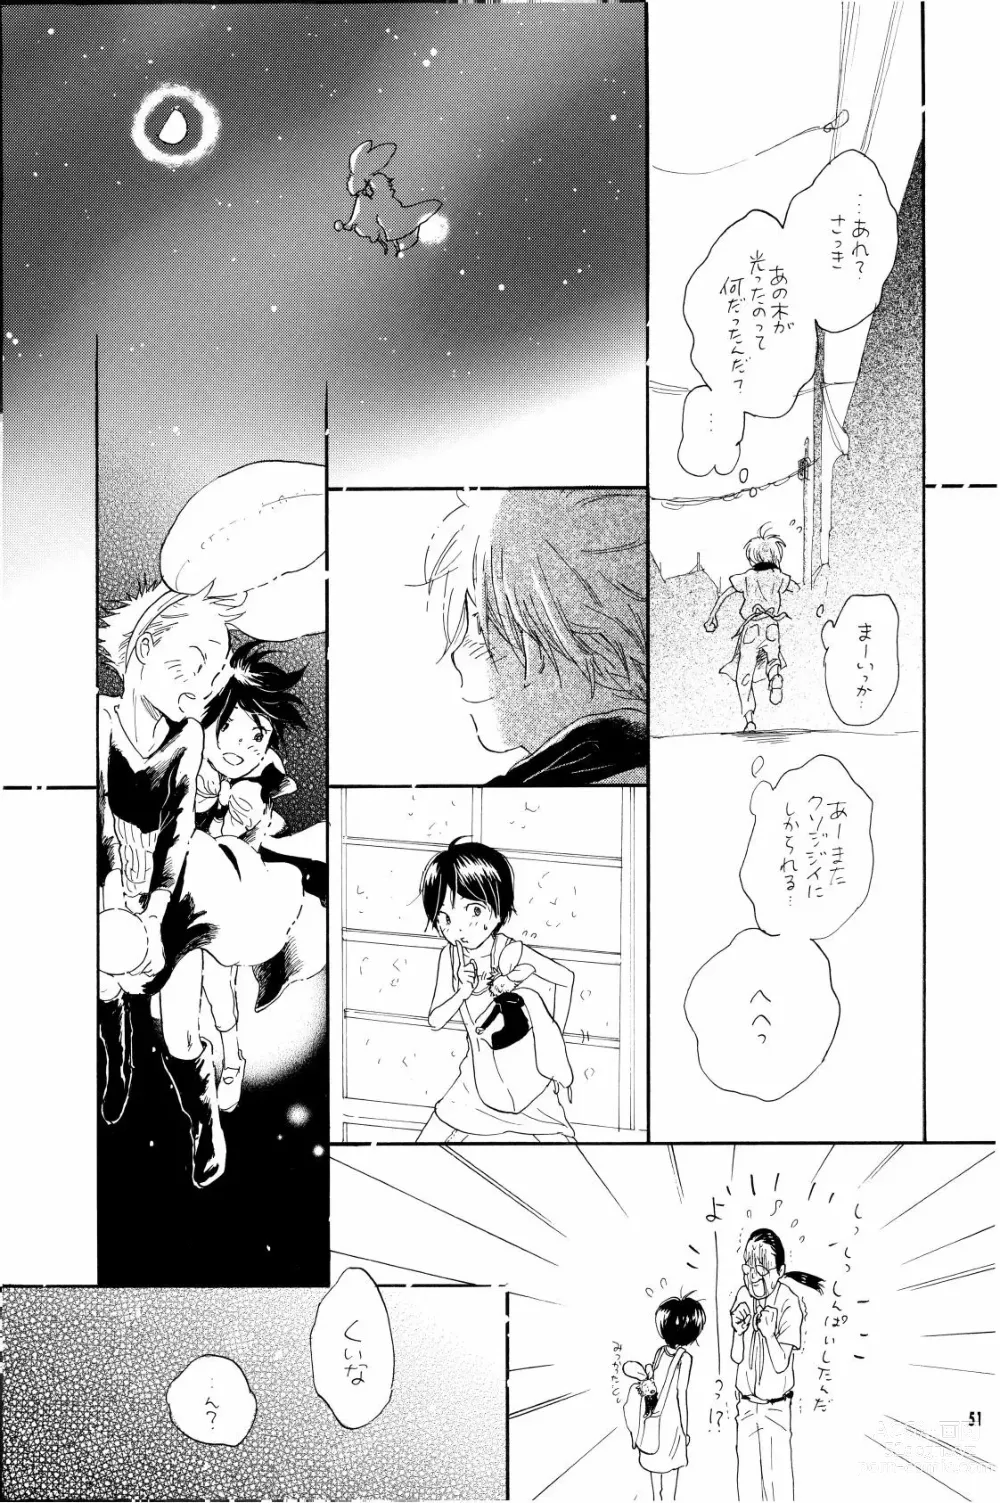 Page 50 of doujinshi your song